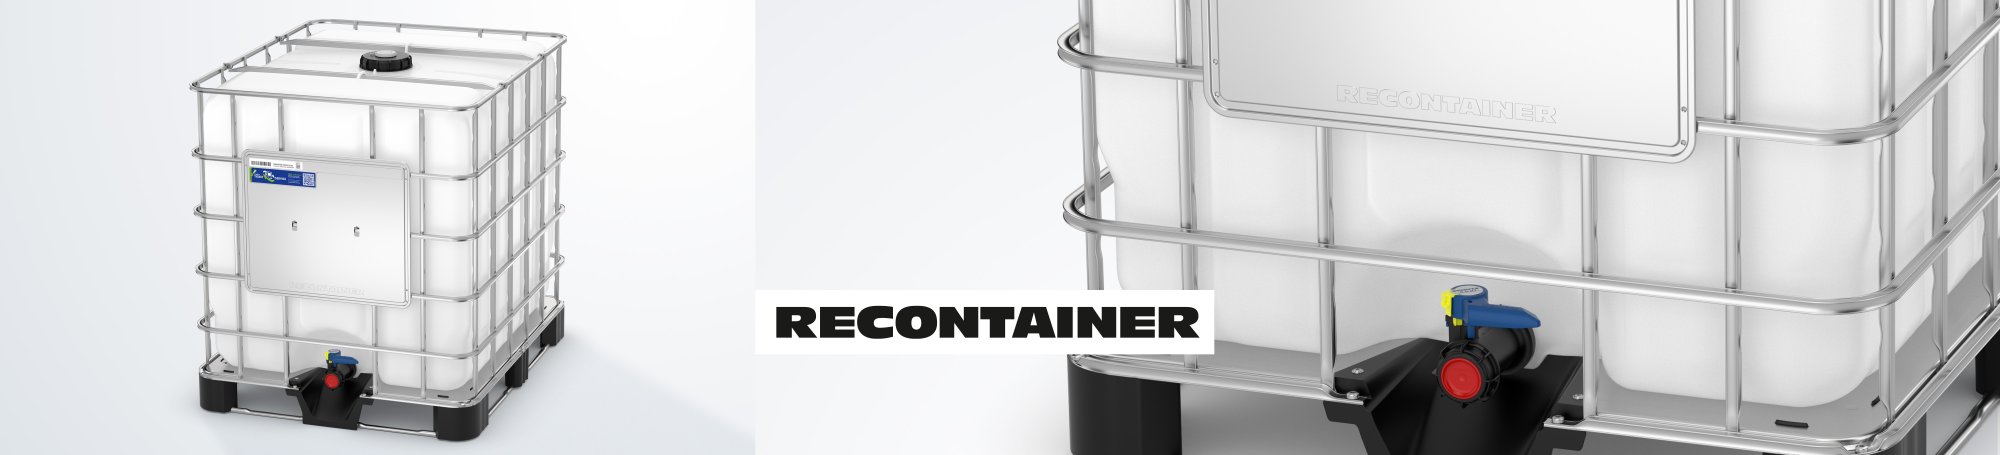 RECONTAINER